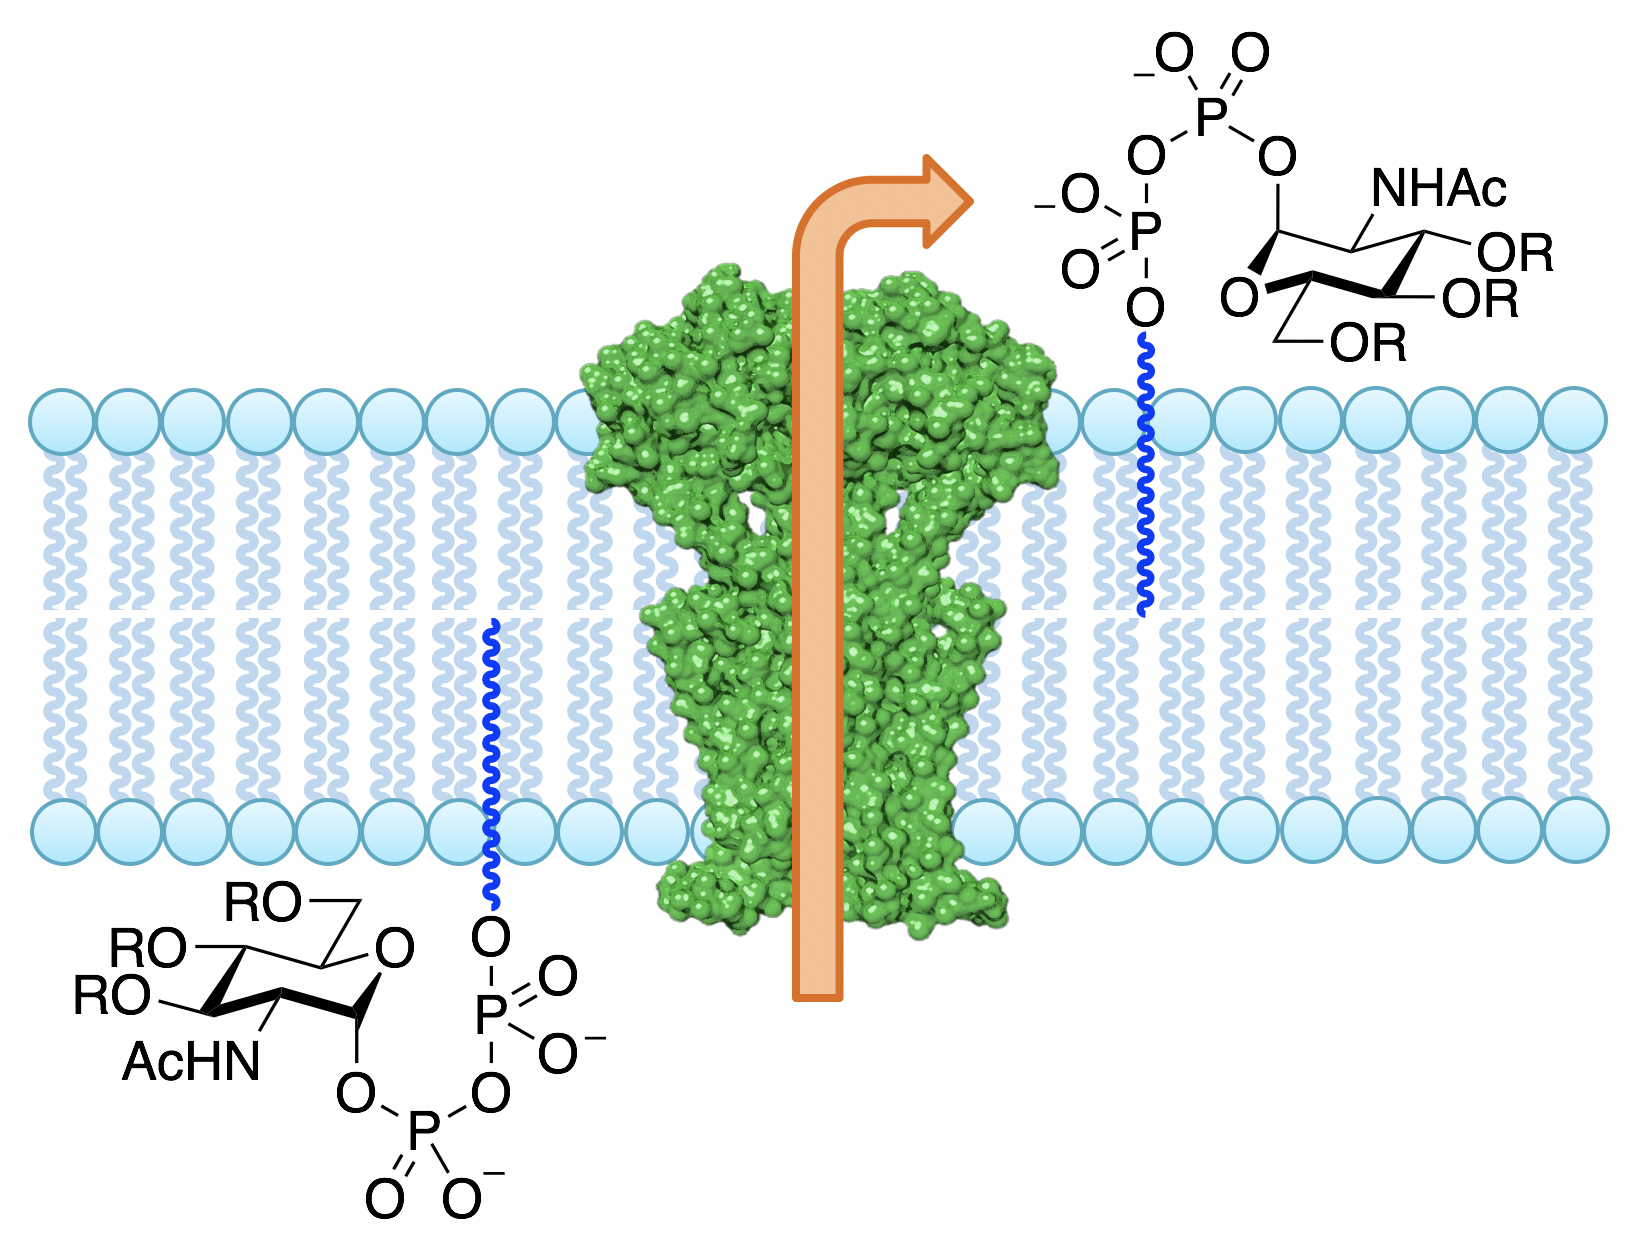 Generic picture of enzyme-mediated glycolipid flipping across a cell membrane